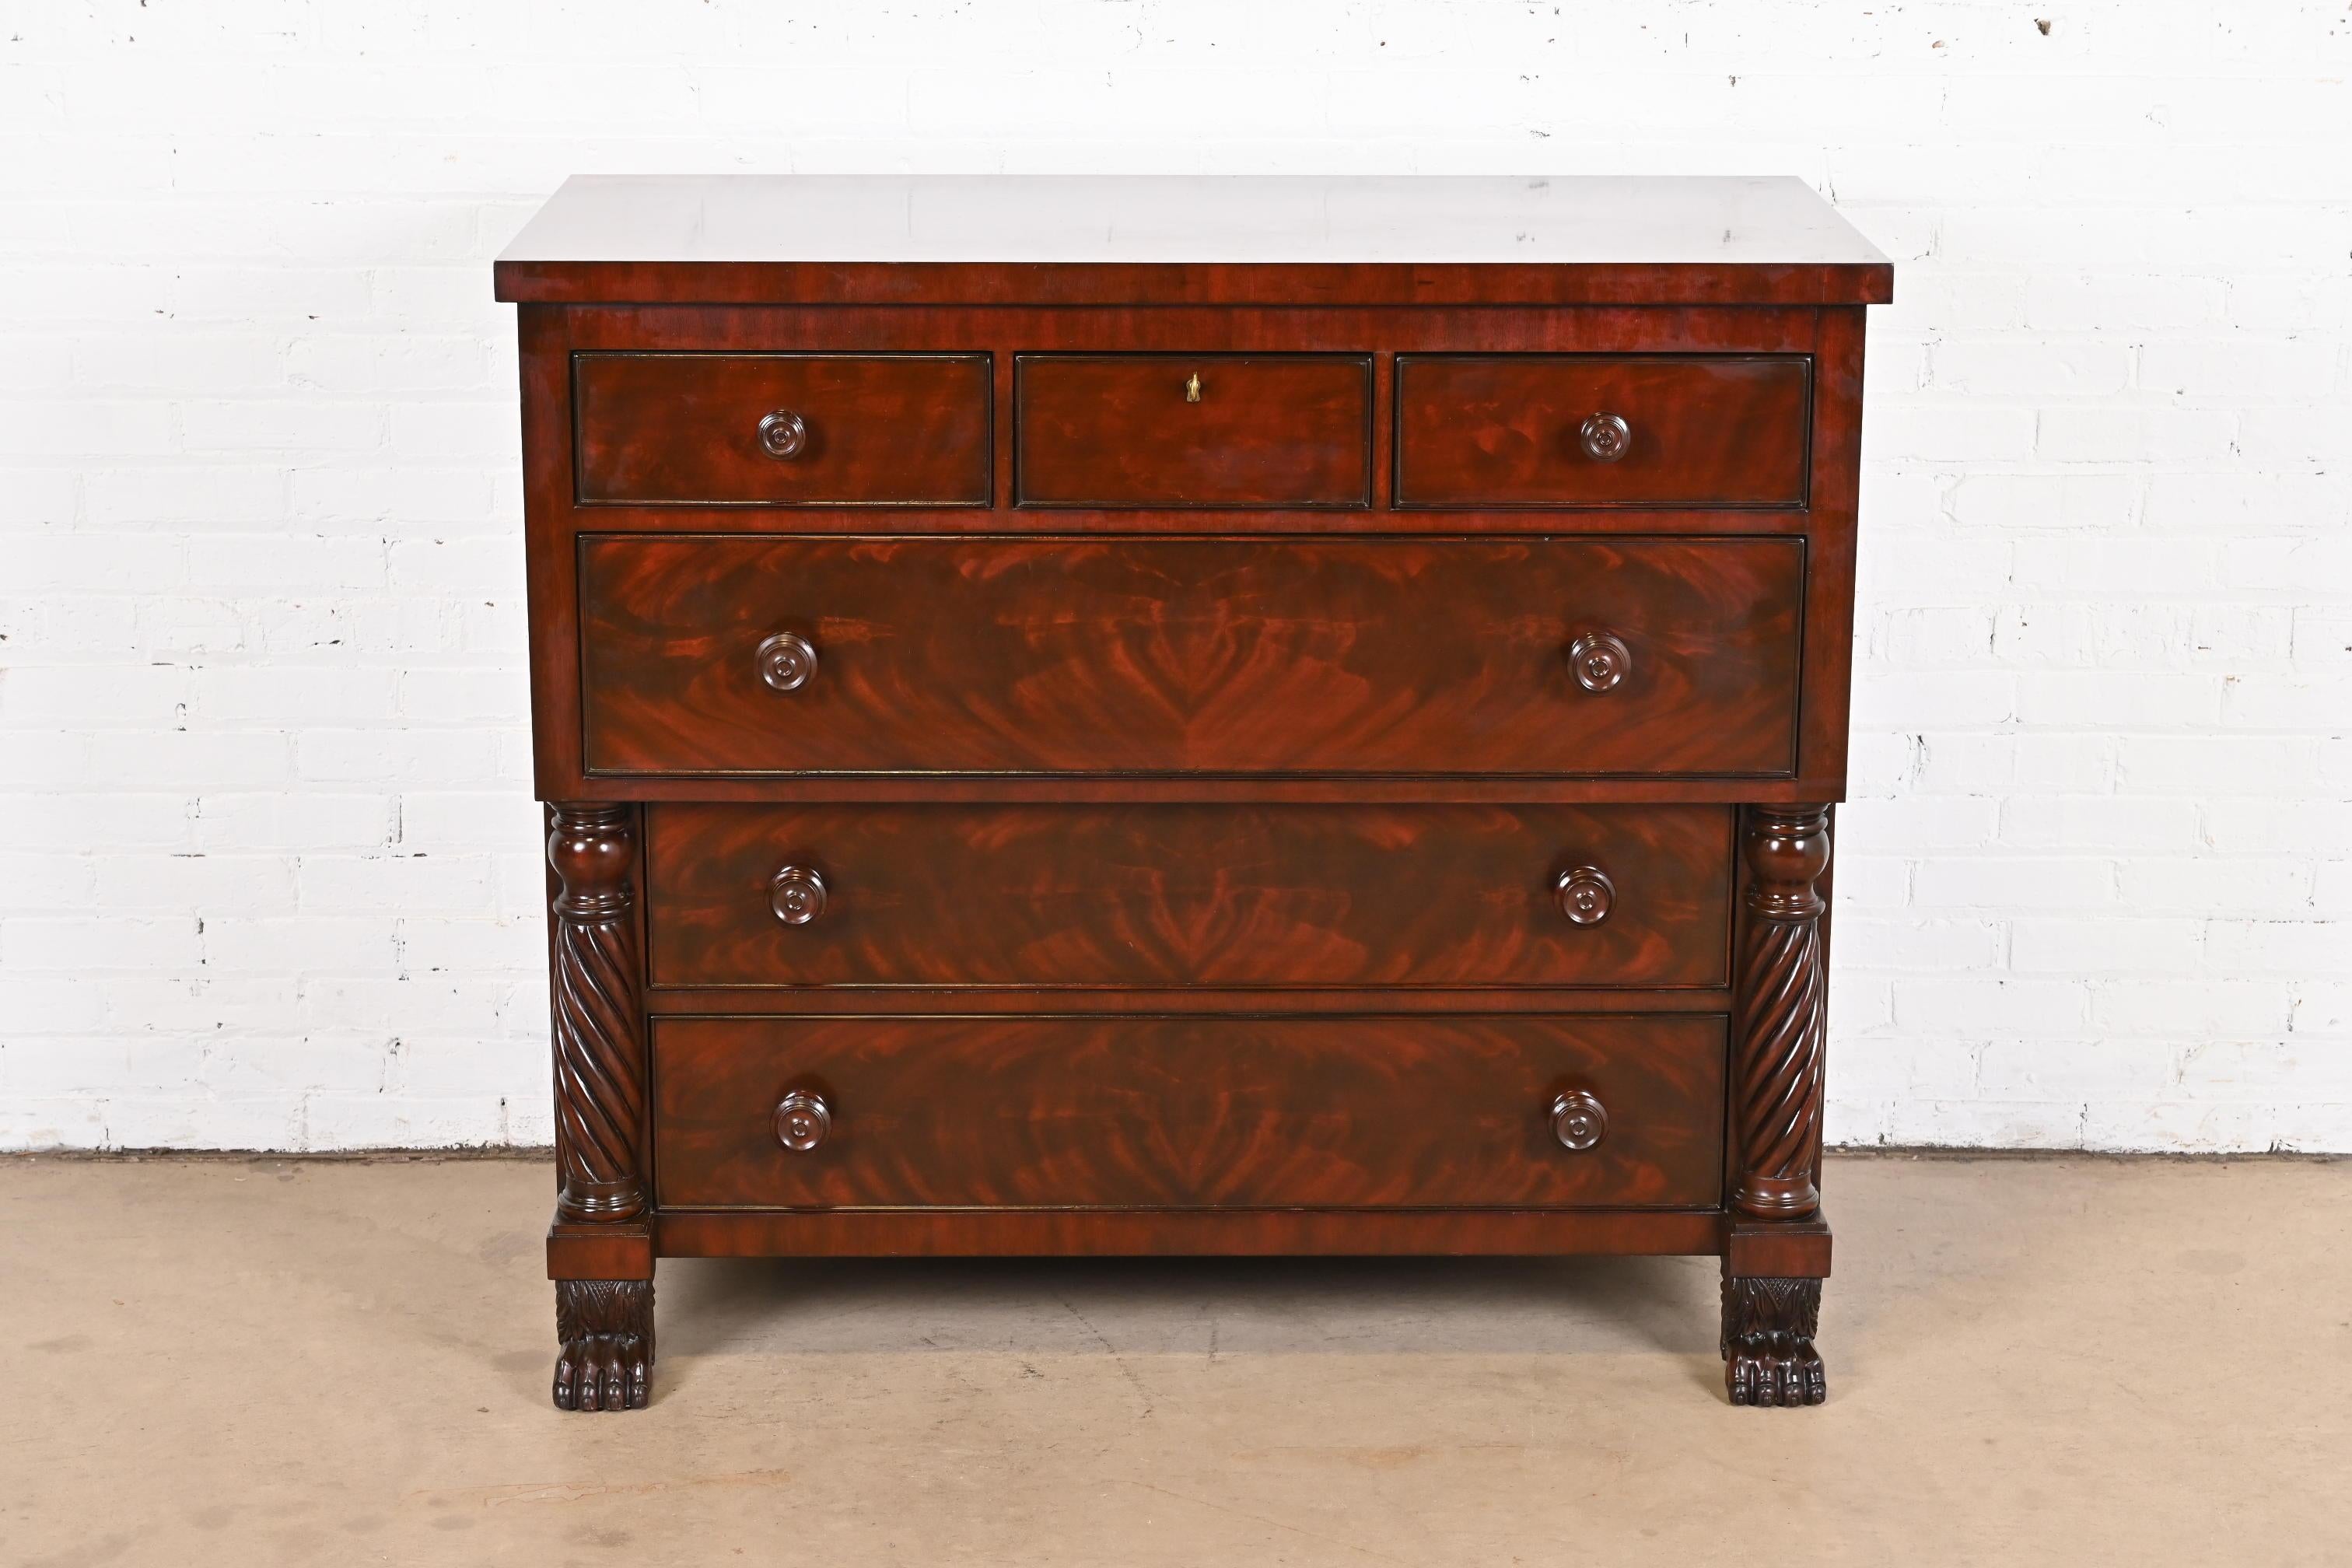 A gorgeous American Empire six-drawer highboy dresser or chest of drawers

By Ralph Lauren

USA, Late 20th century

Stunning book-matched flame mahogany, with carved columns and paw feet.

Measures: 48